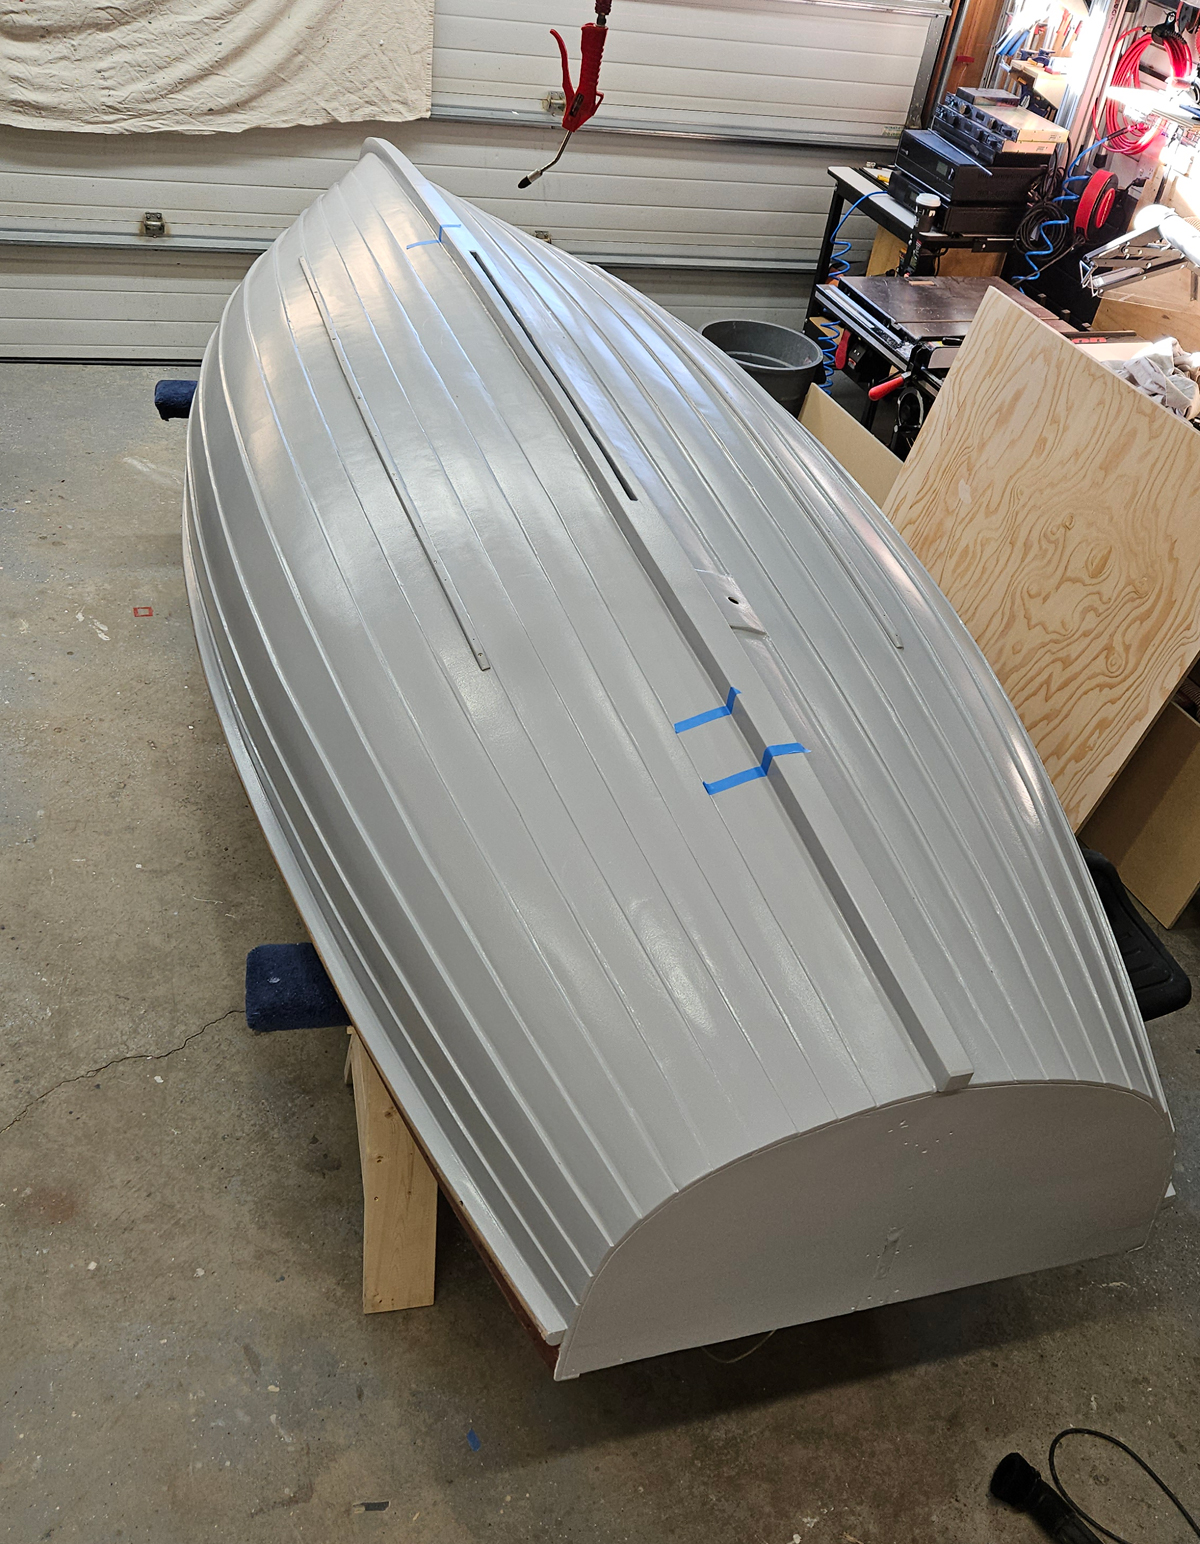 The dinghy is looking great thanks to the help of the conservation project. Photos supplied.
